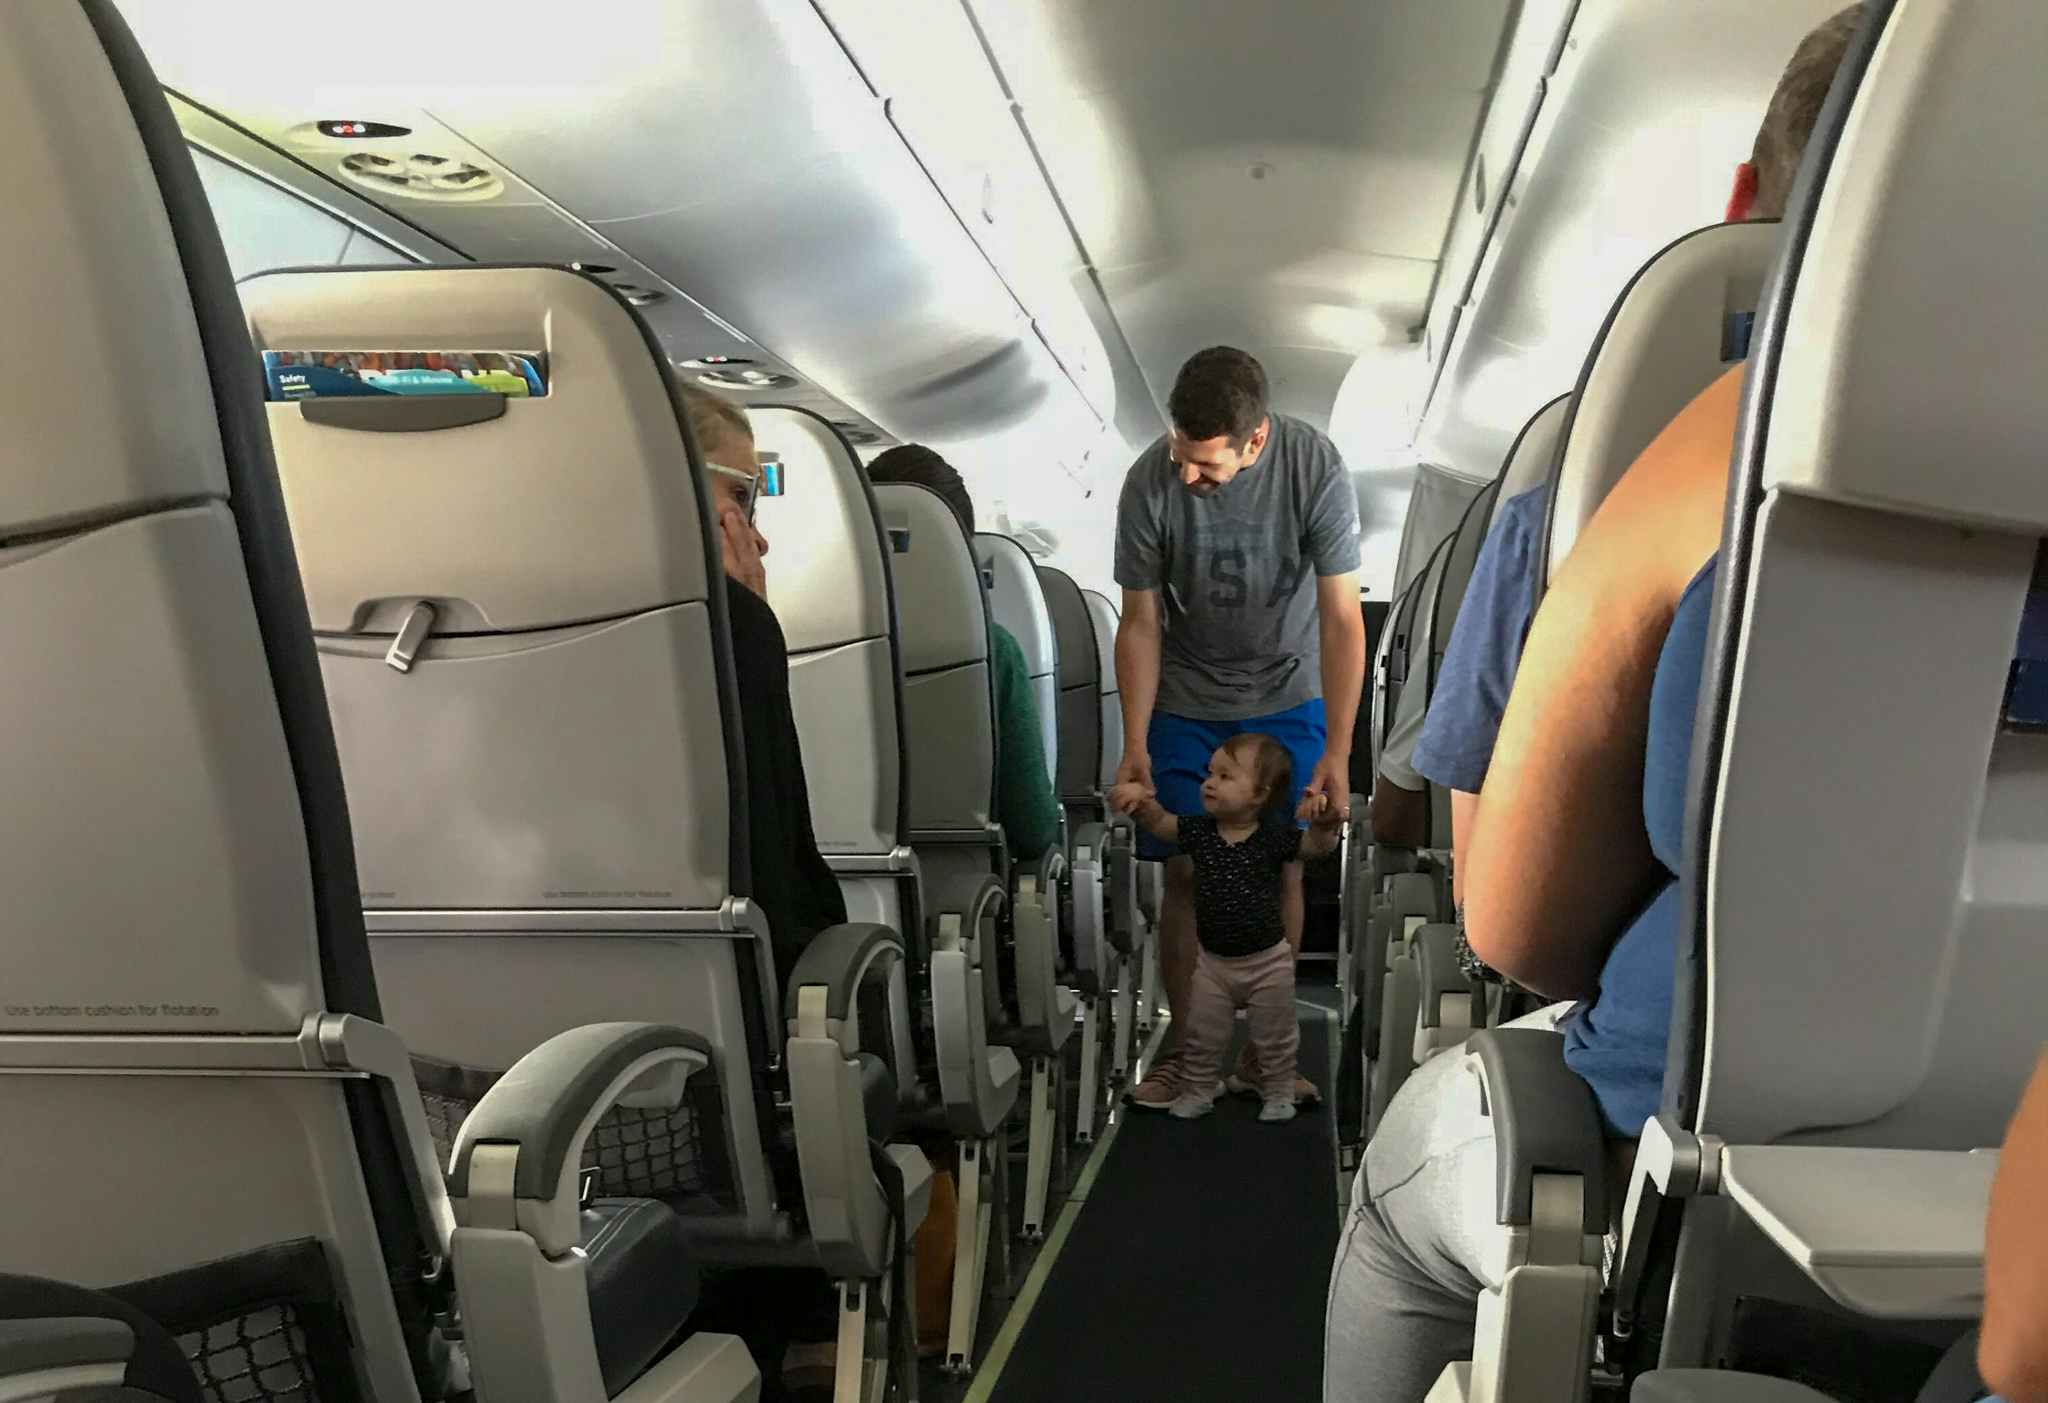 A father walking his child down the aisle of an airplane.